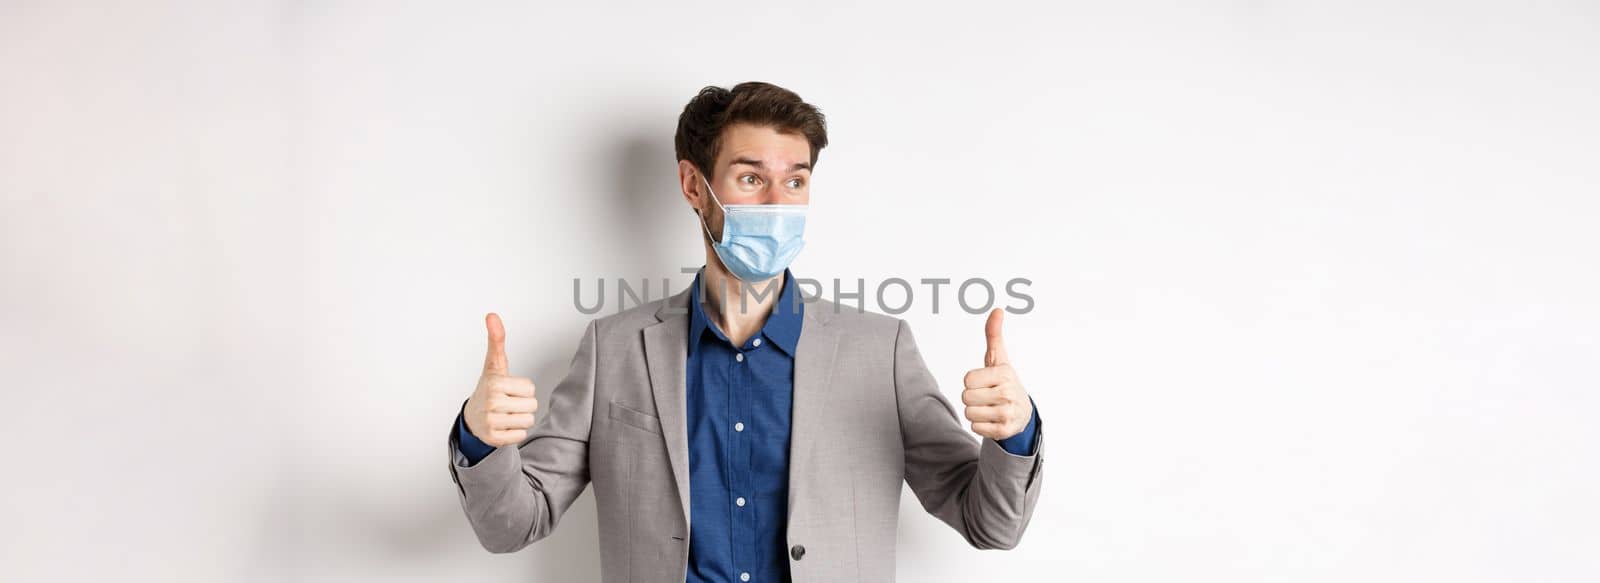 Covid-19, pandemic and business concept. Excited businessman in face mask and suit, showing thumbs up and looking aside at logo impressed, praise good thing, white background.